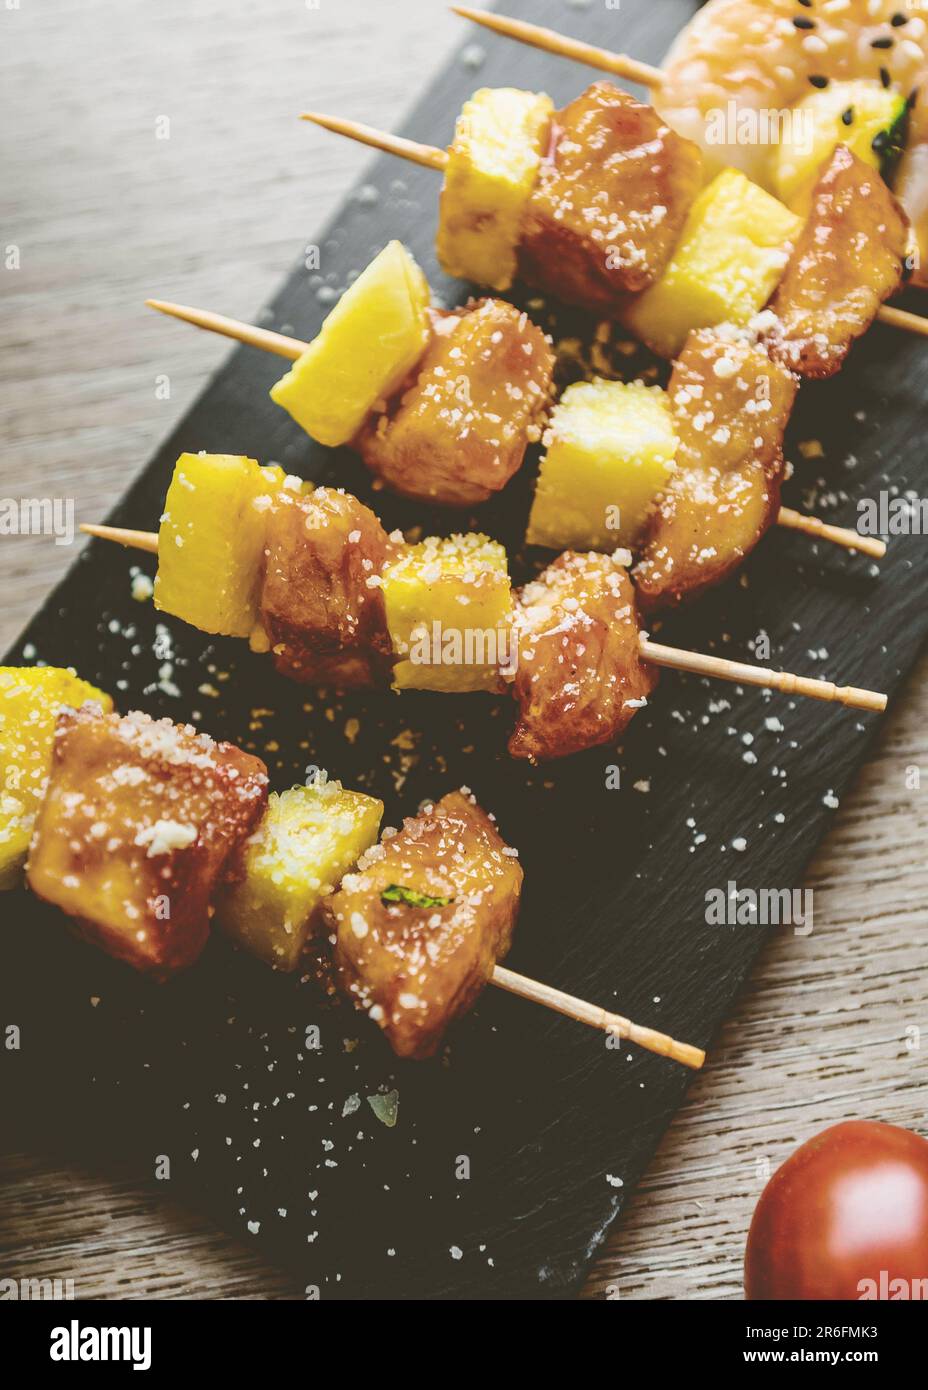 A succulent array of skewered meats and vegetables, arranged on a matte black board Stock Photo